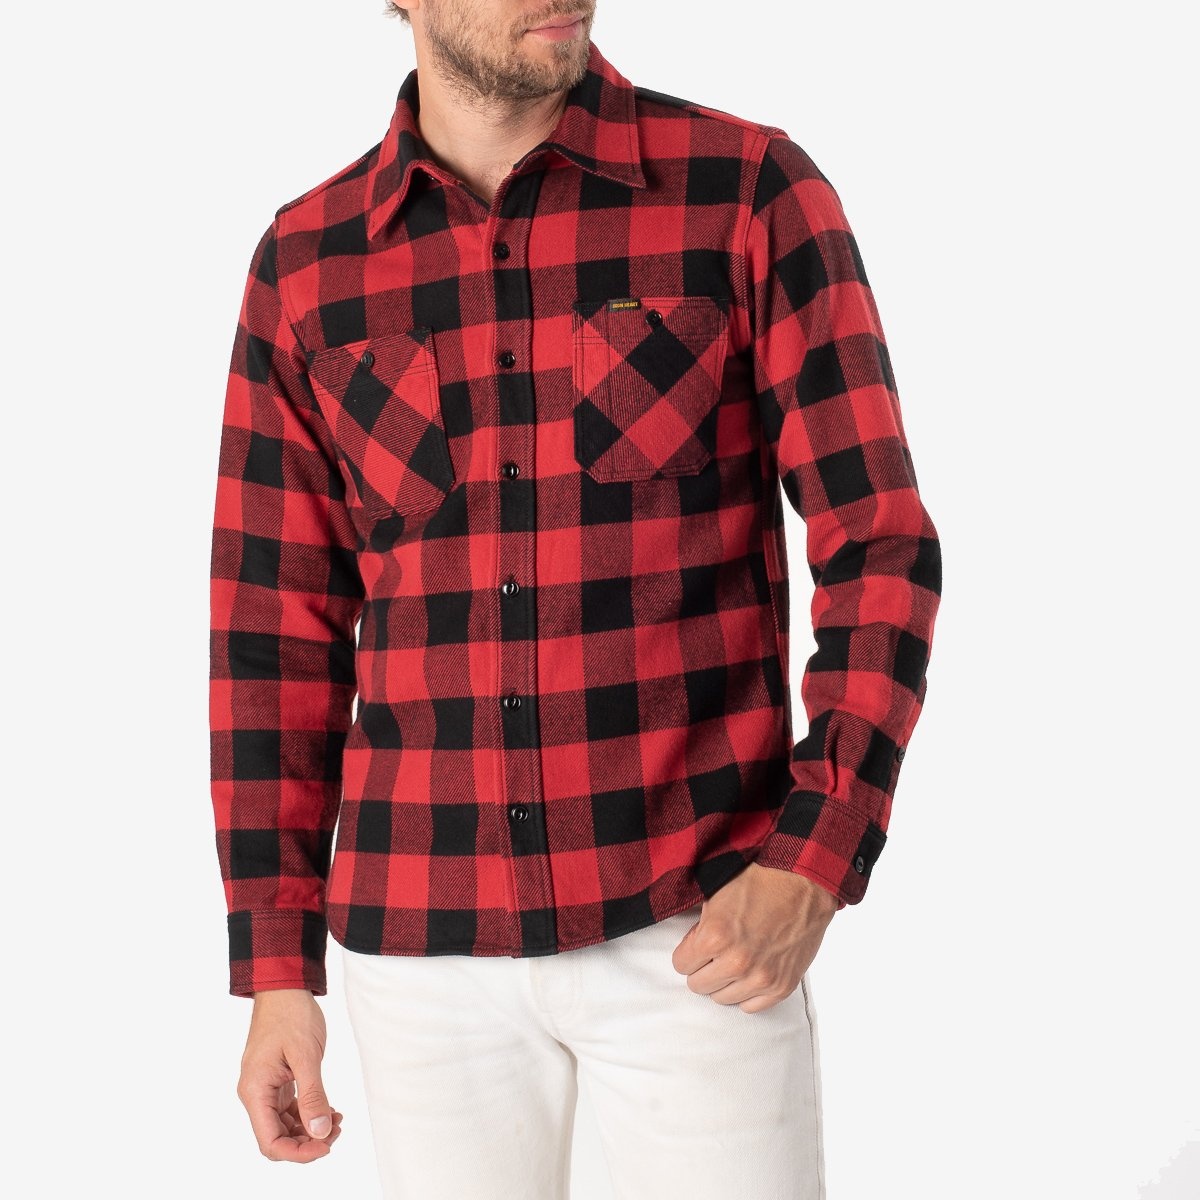 IHSH-244-RED Ultra Heavy Flannel Buffalo Check Work Shirt - Red/Black - 2